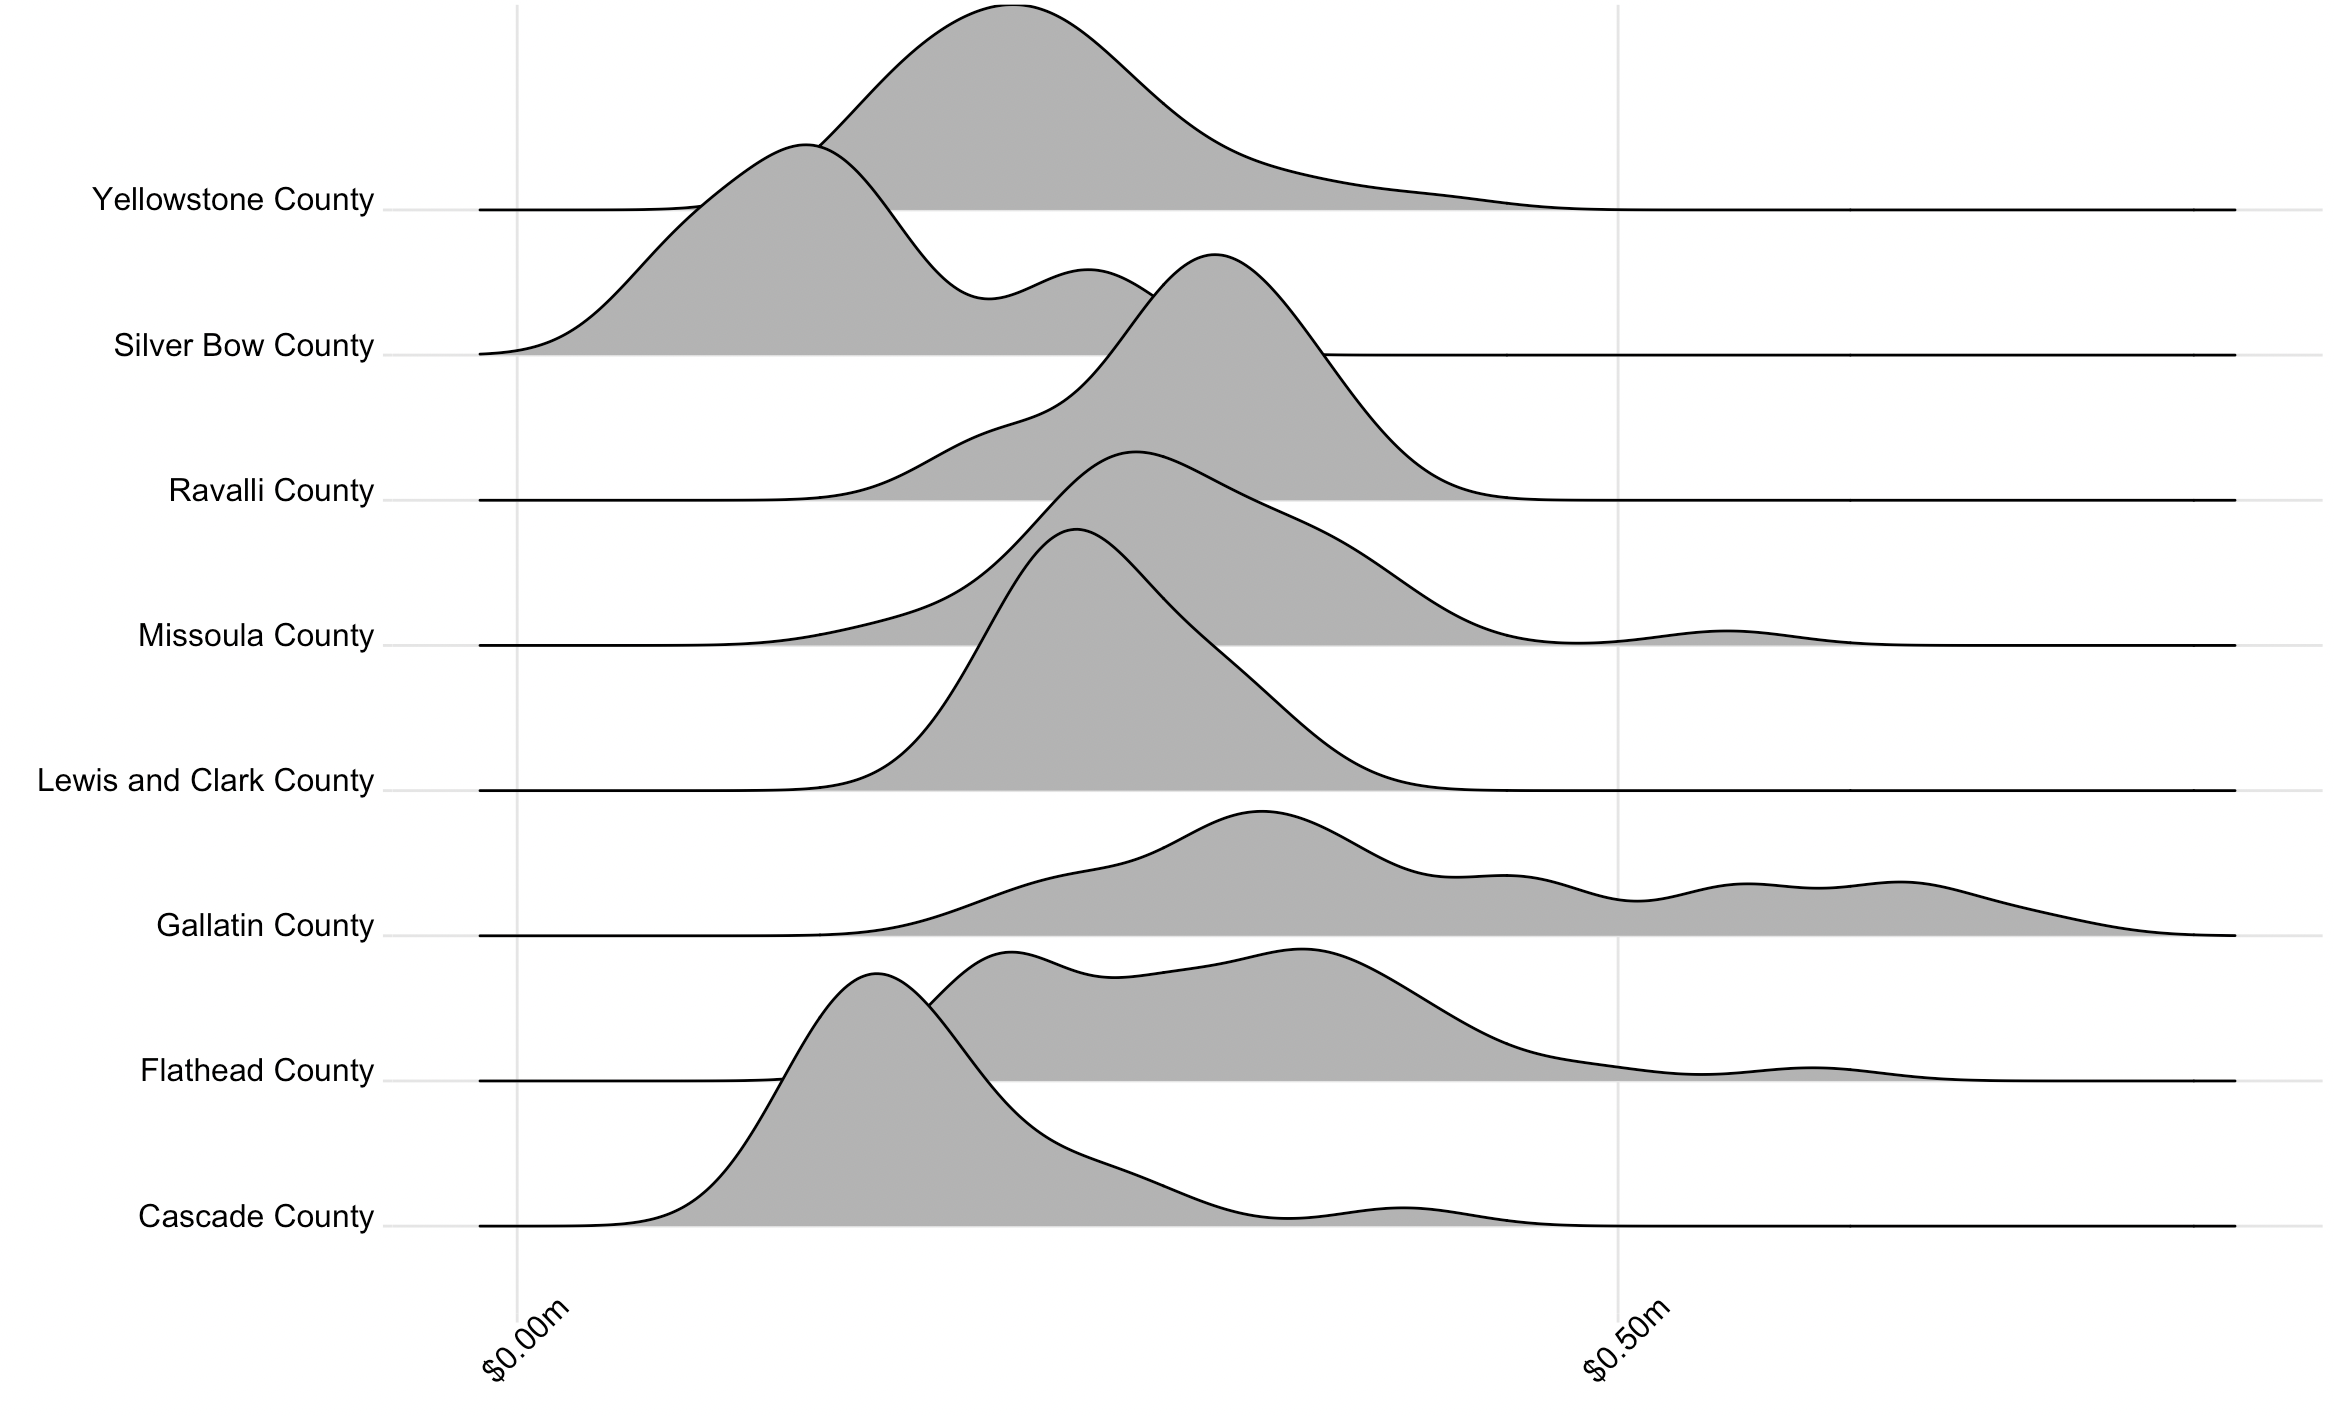 Visualizing Montana Home Values with R